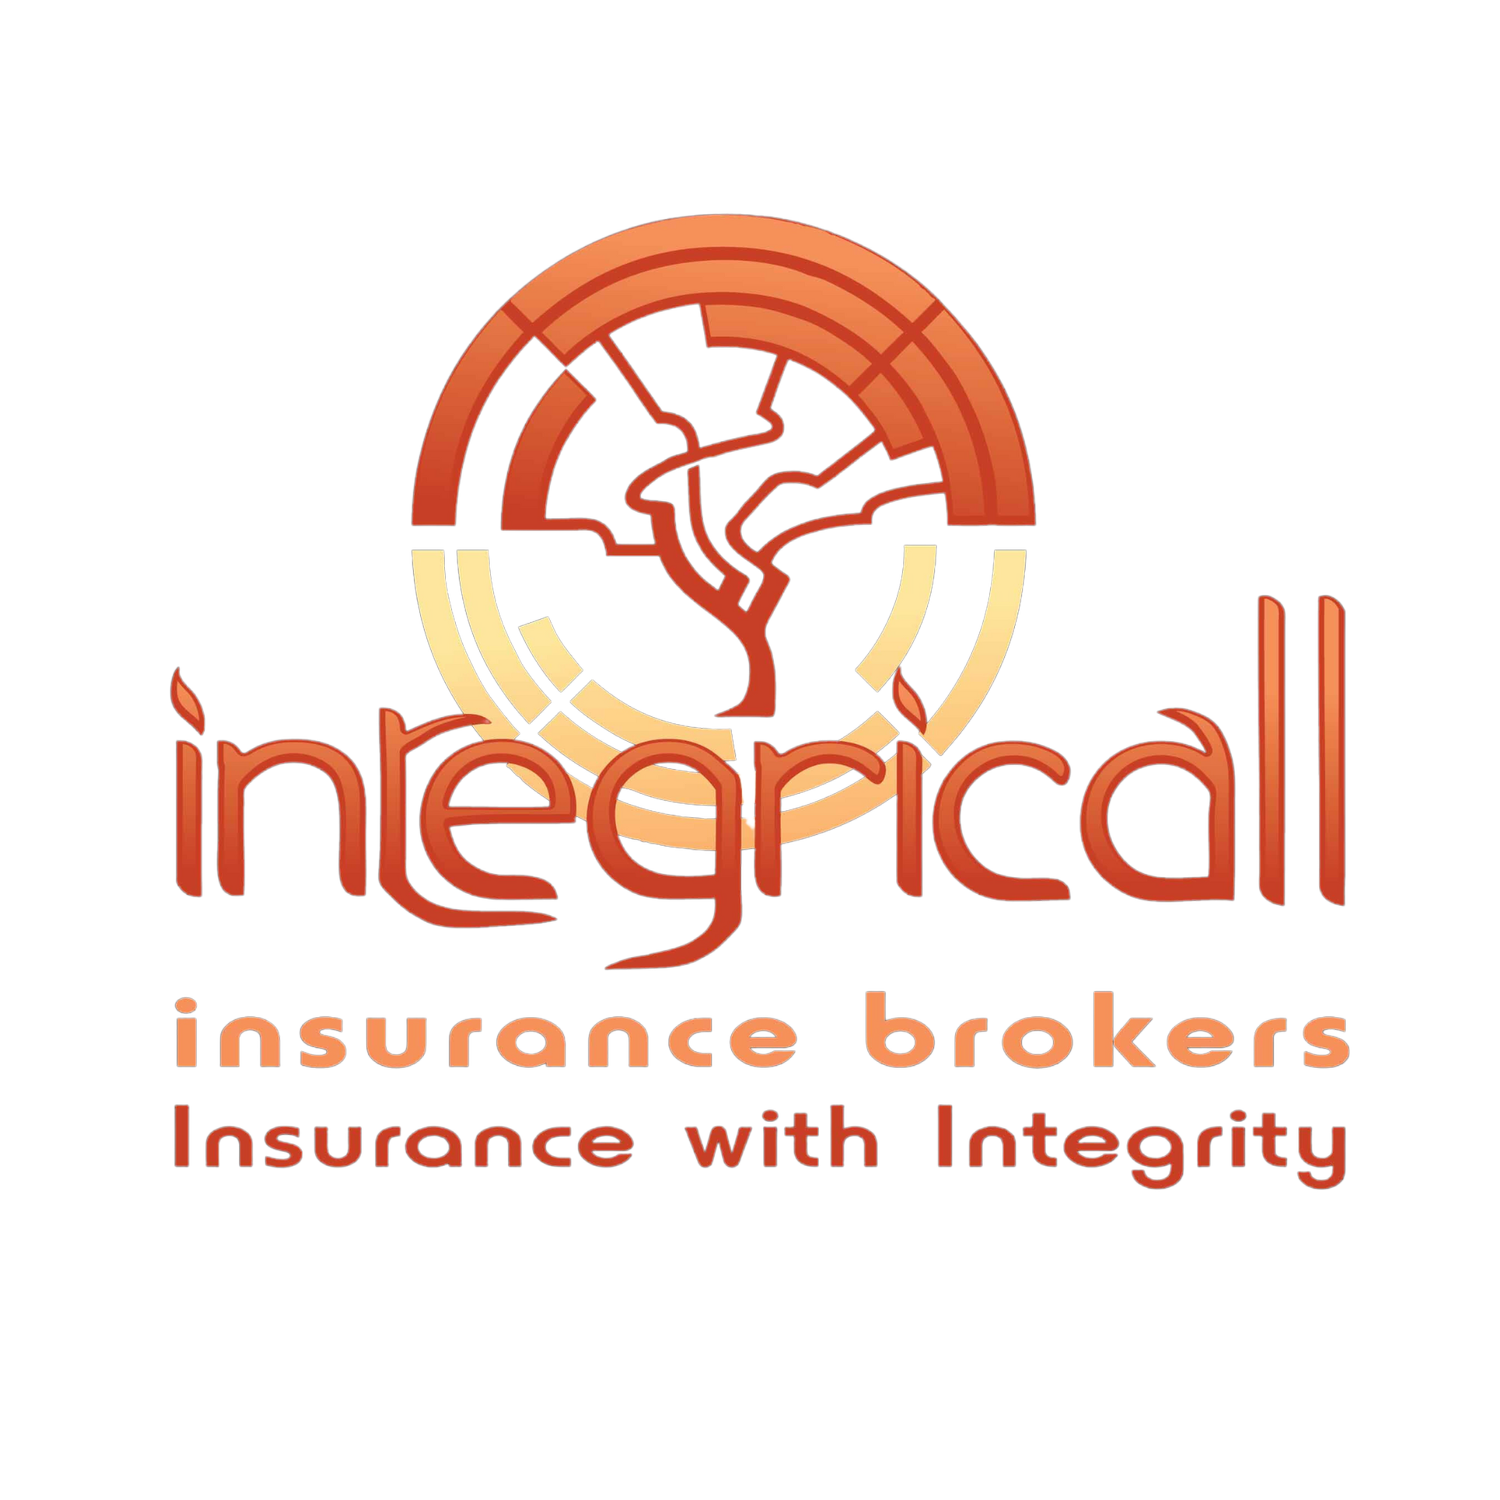 Integricall Insurance